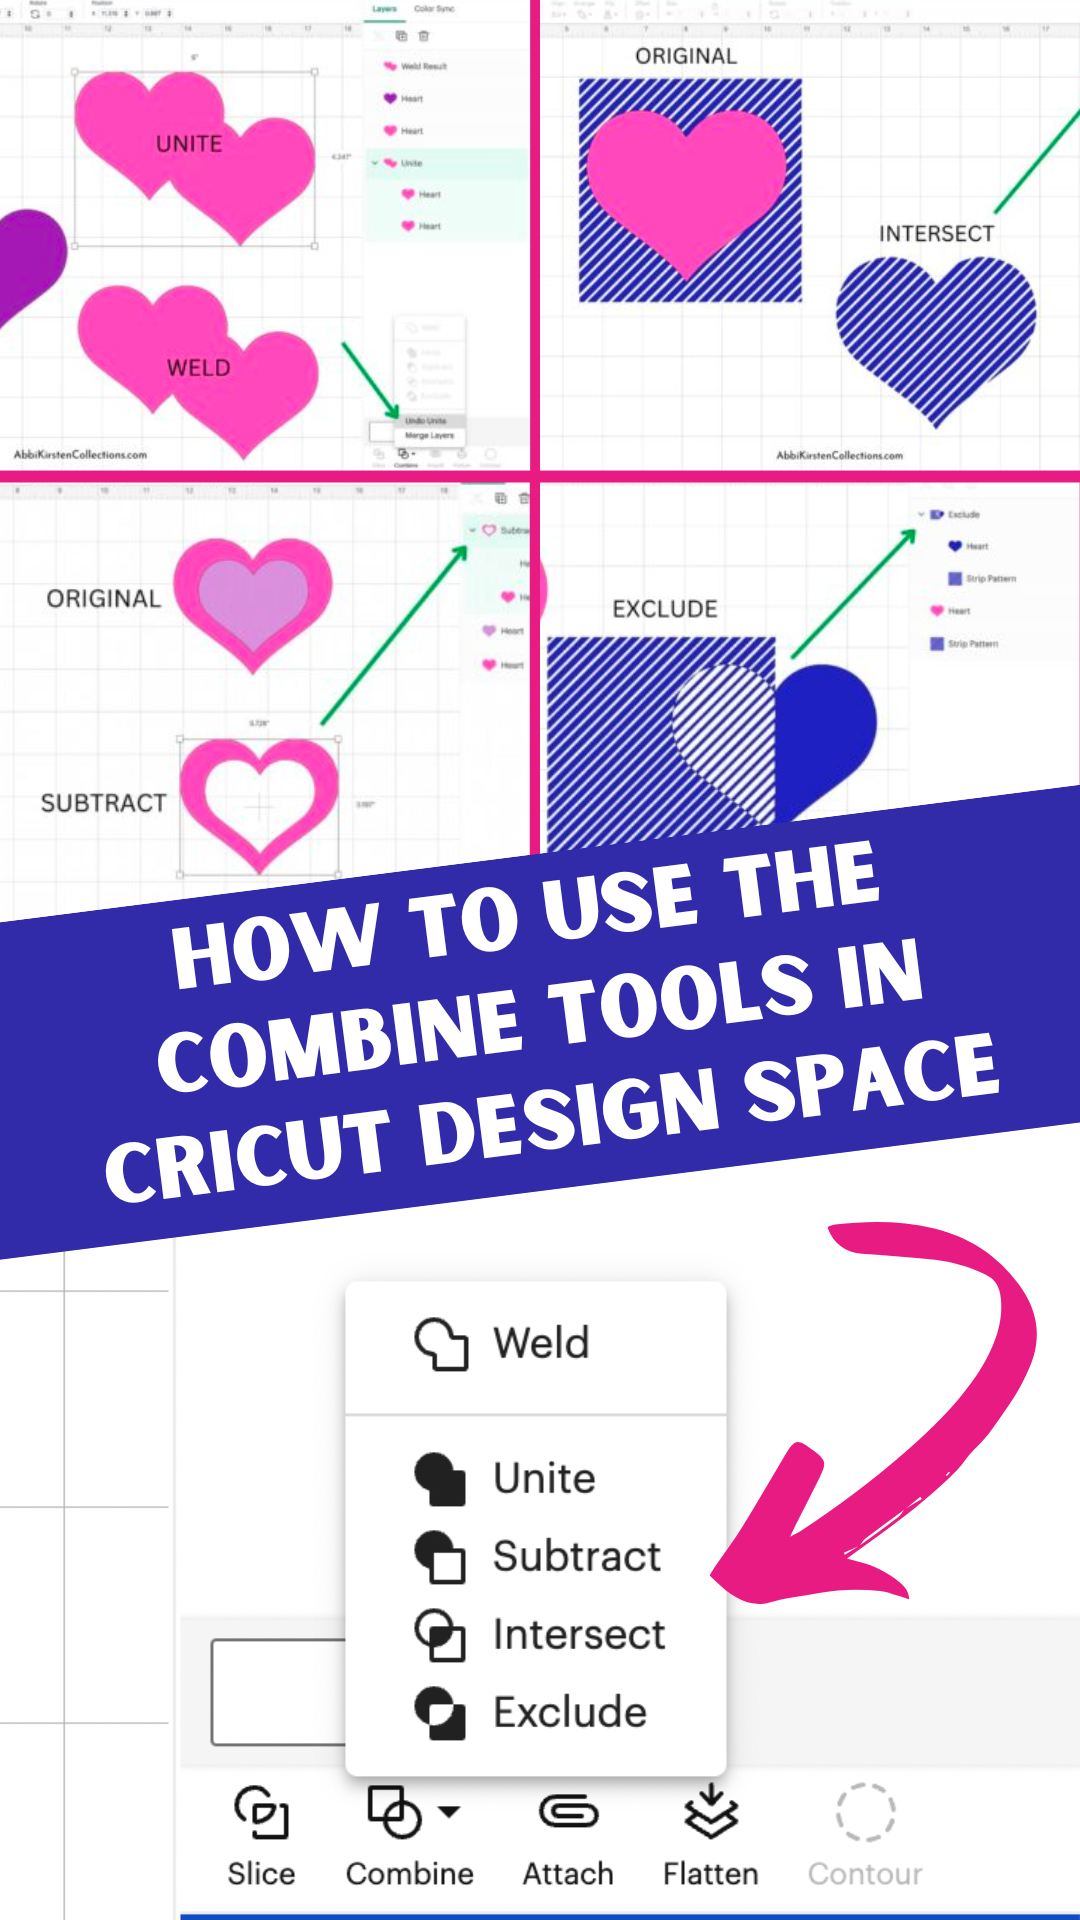 Cricut Design Space Combine Tools: Weld, Unite, Subtract, Intersect and Exclude